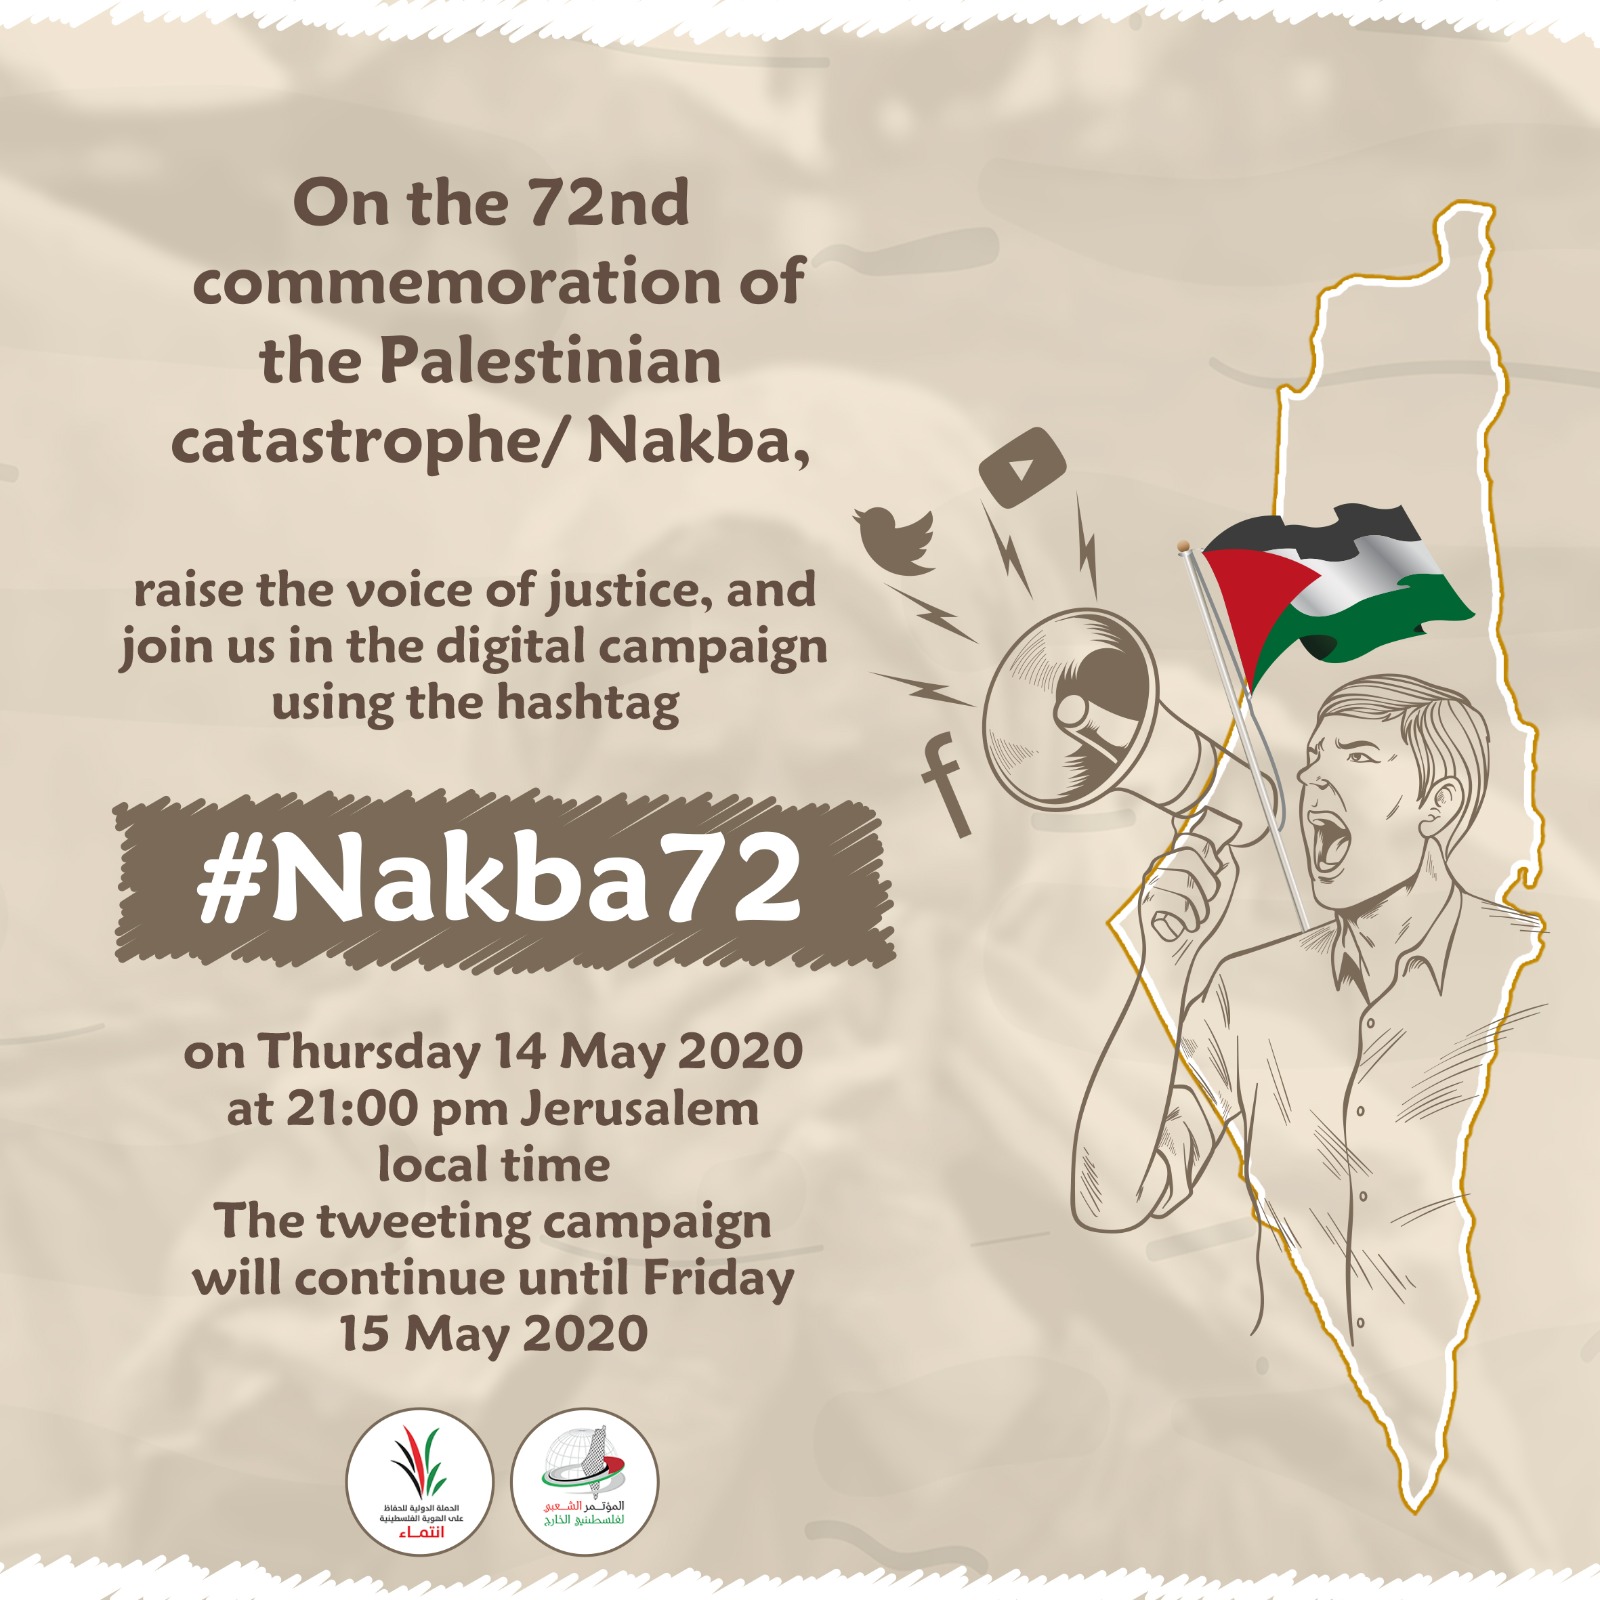 Activists and Supporters Interact with #Nakba72 Online Rally